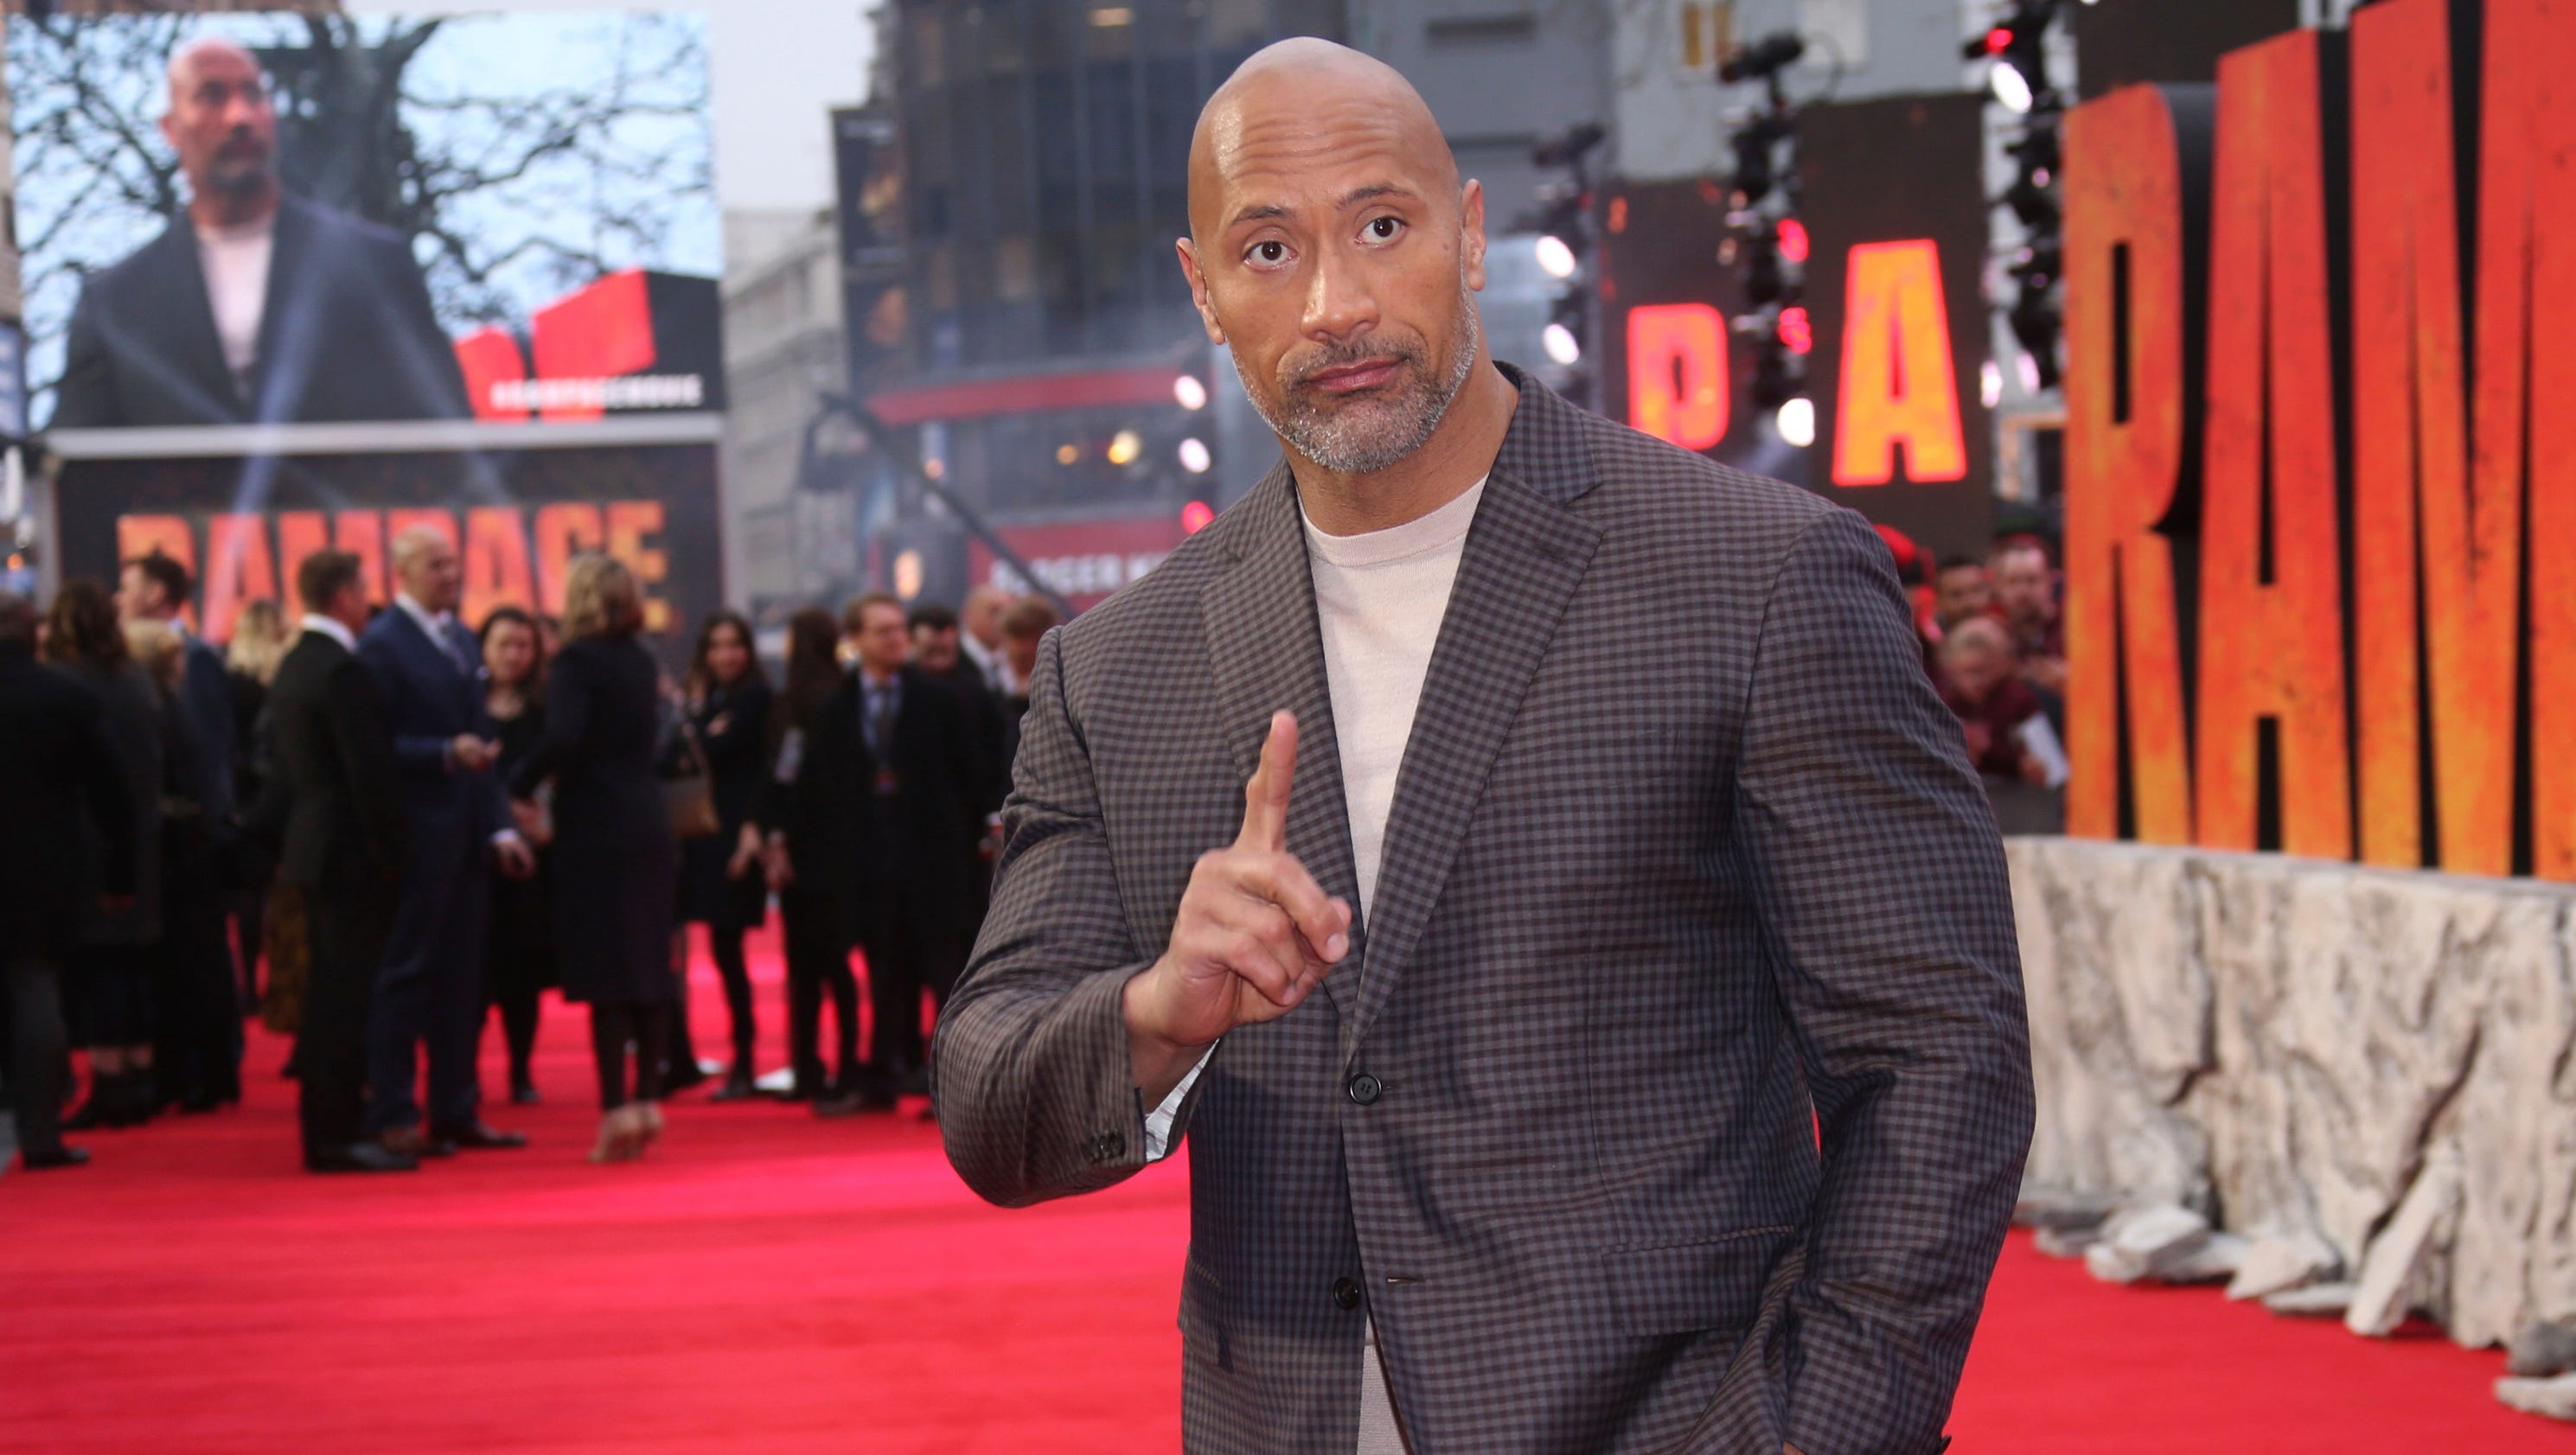 Dwayne Johnson gives masterful performance commenting on the DJ Khaled sex controversy